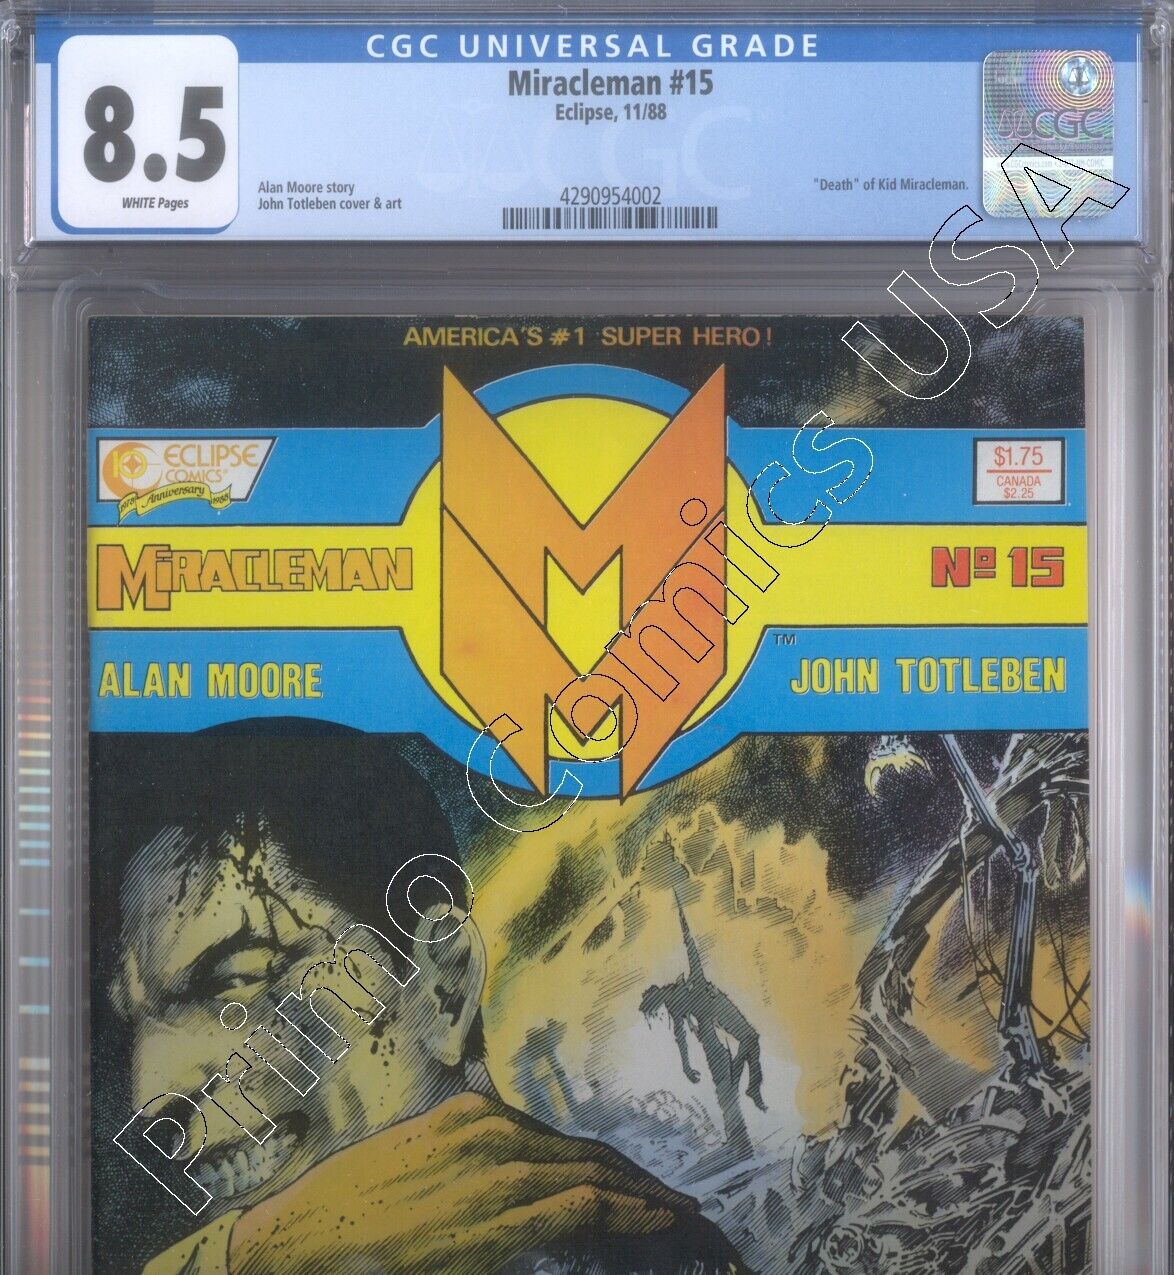 PRIMO:  MIRACLEMAN #15 Printing Error Miscolored Eclipse CGC 8.5 VF+